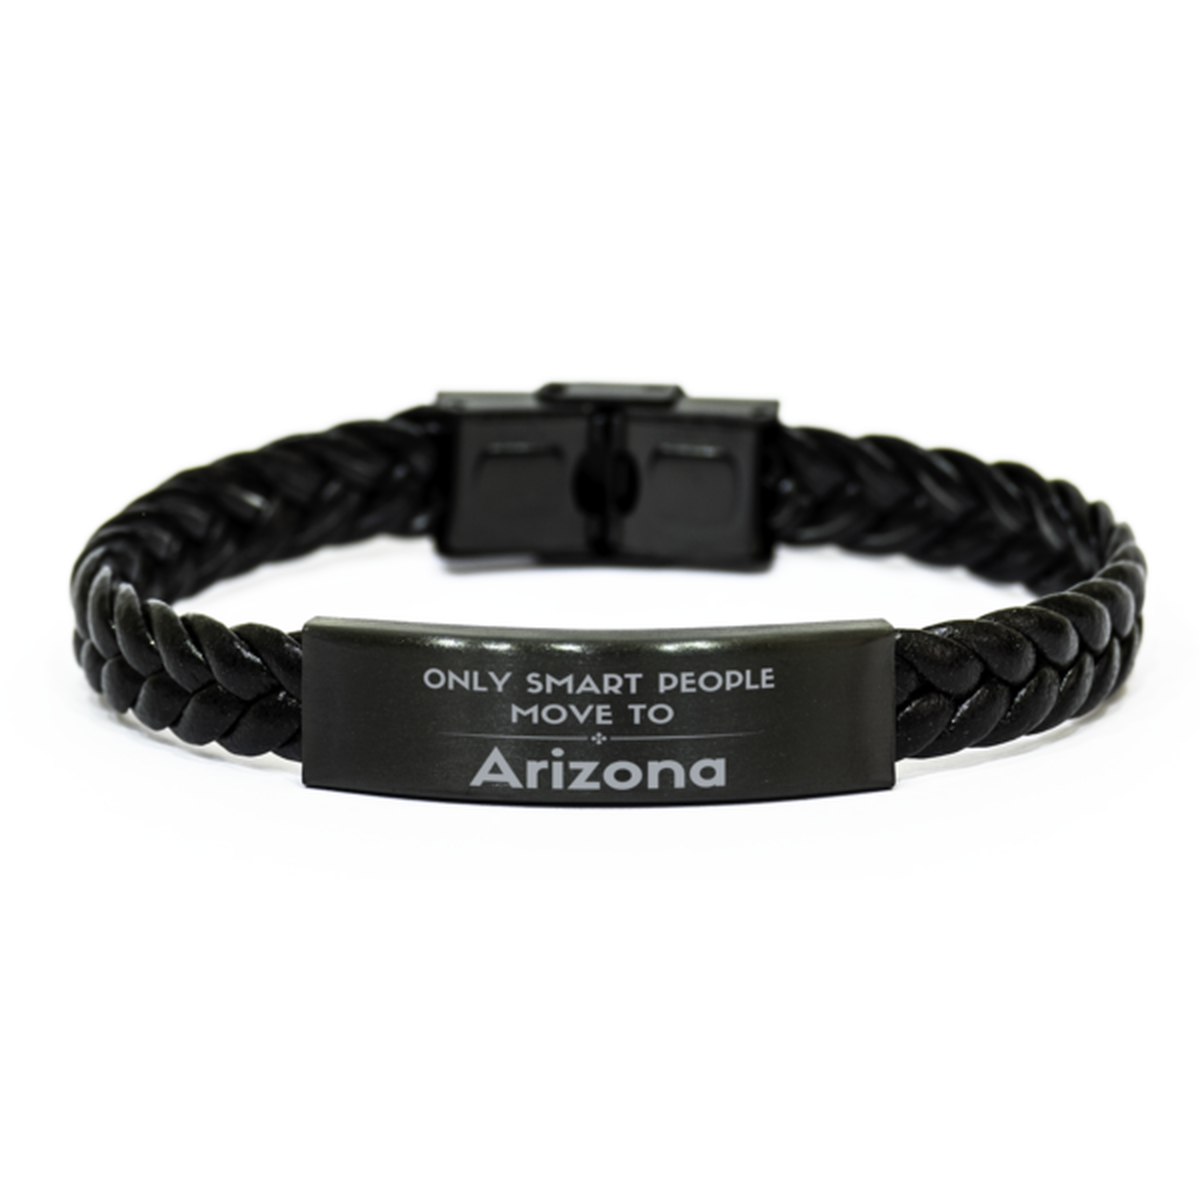 Only smart people move to Arizona Braided Leather Bracelet, Gag Gifts For Arizona, Move to Arizona Gifts for Friends Coworker Funny Saying Quote